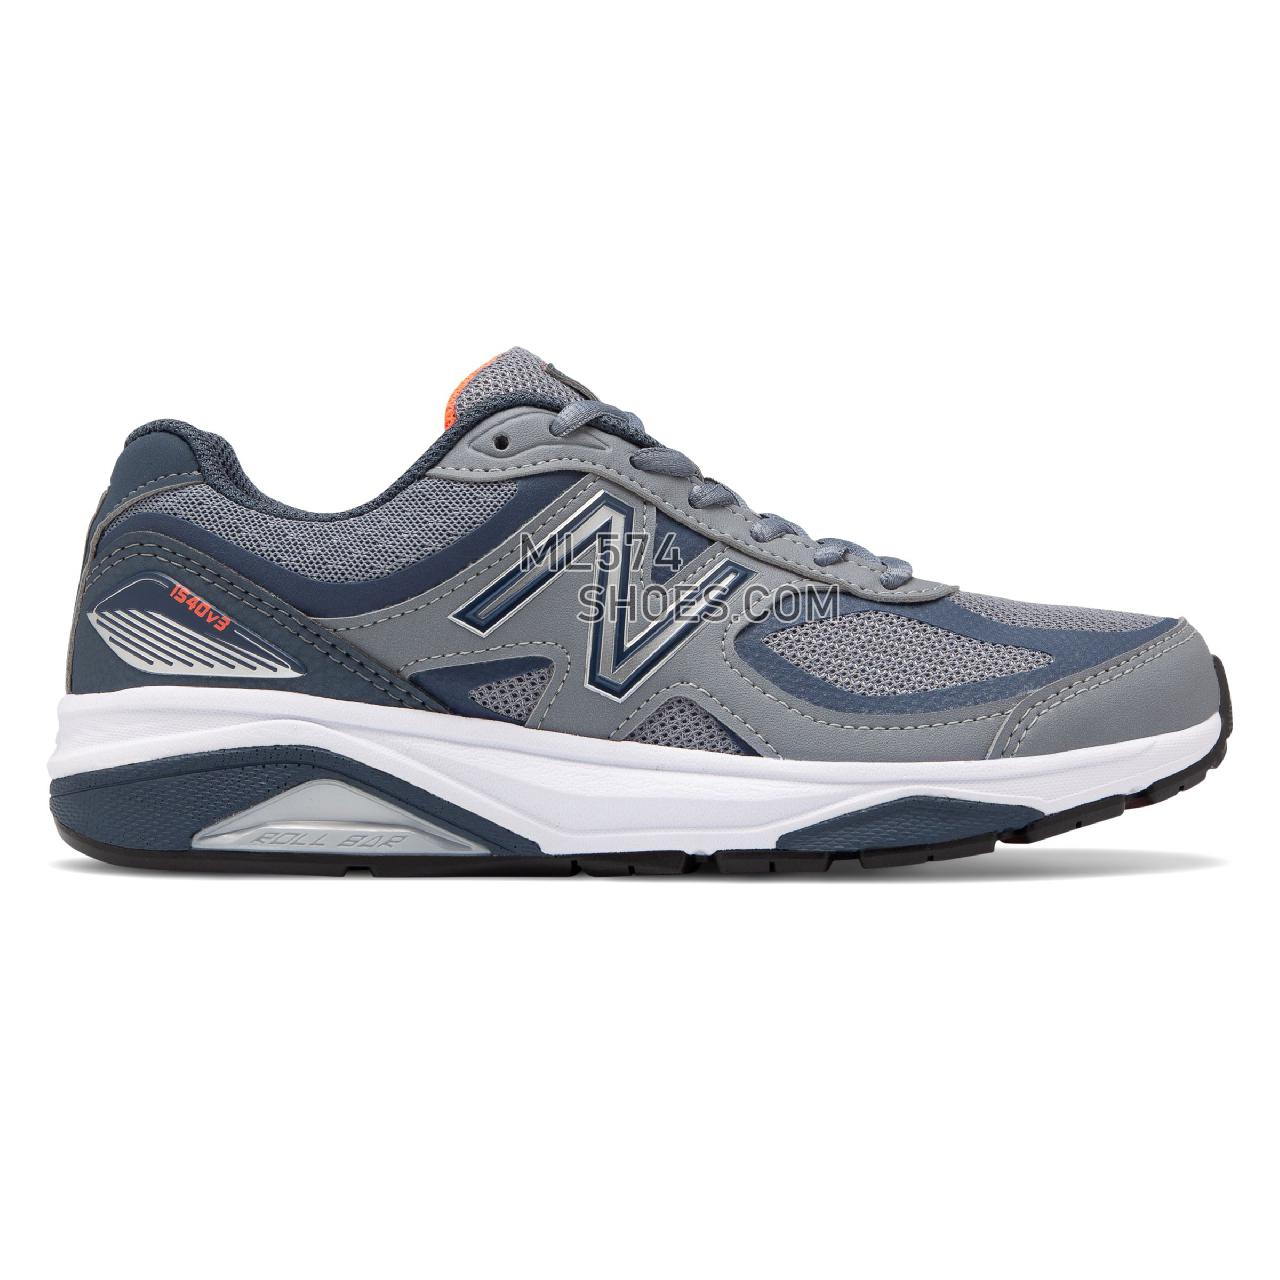 New Balance Made in US 1540v3 - Women's Motion Control Running - Gunmetal with Dragonfly - W1540GD3